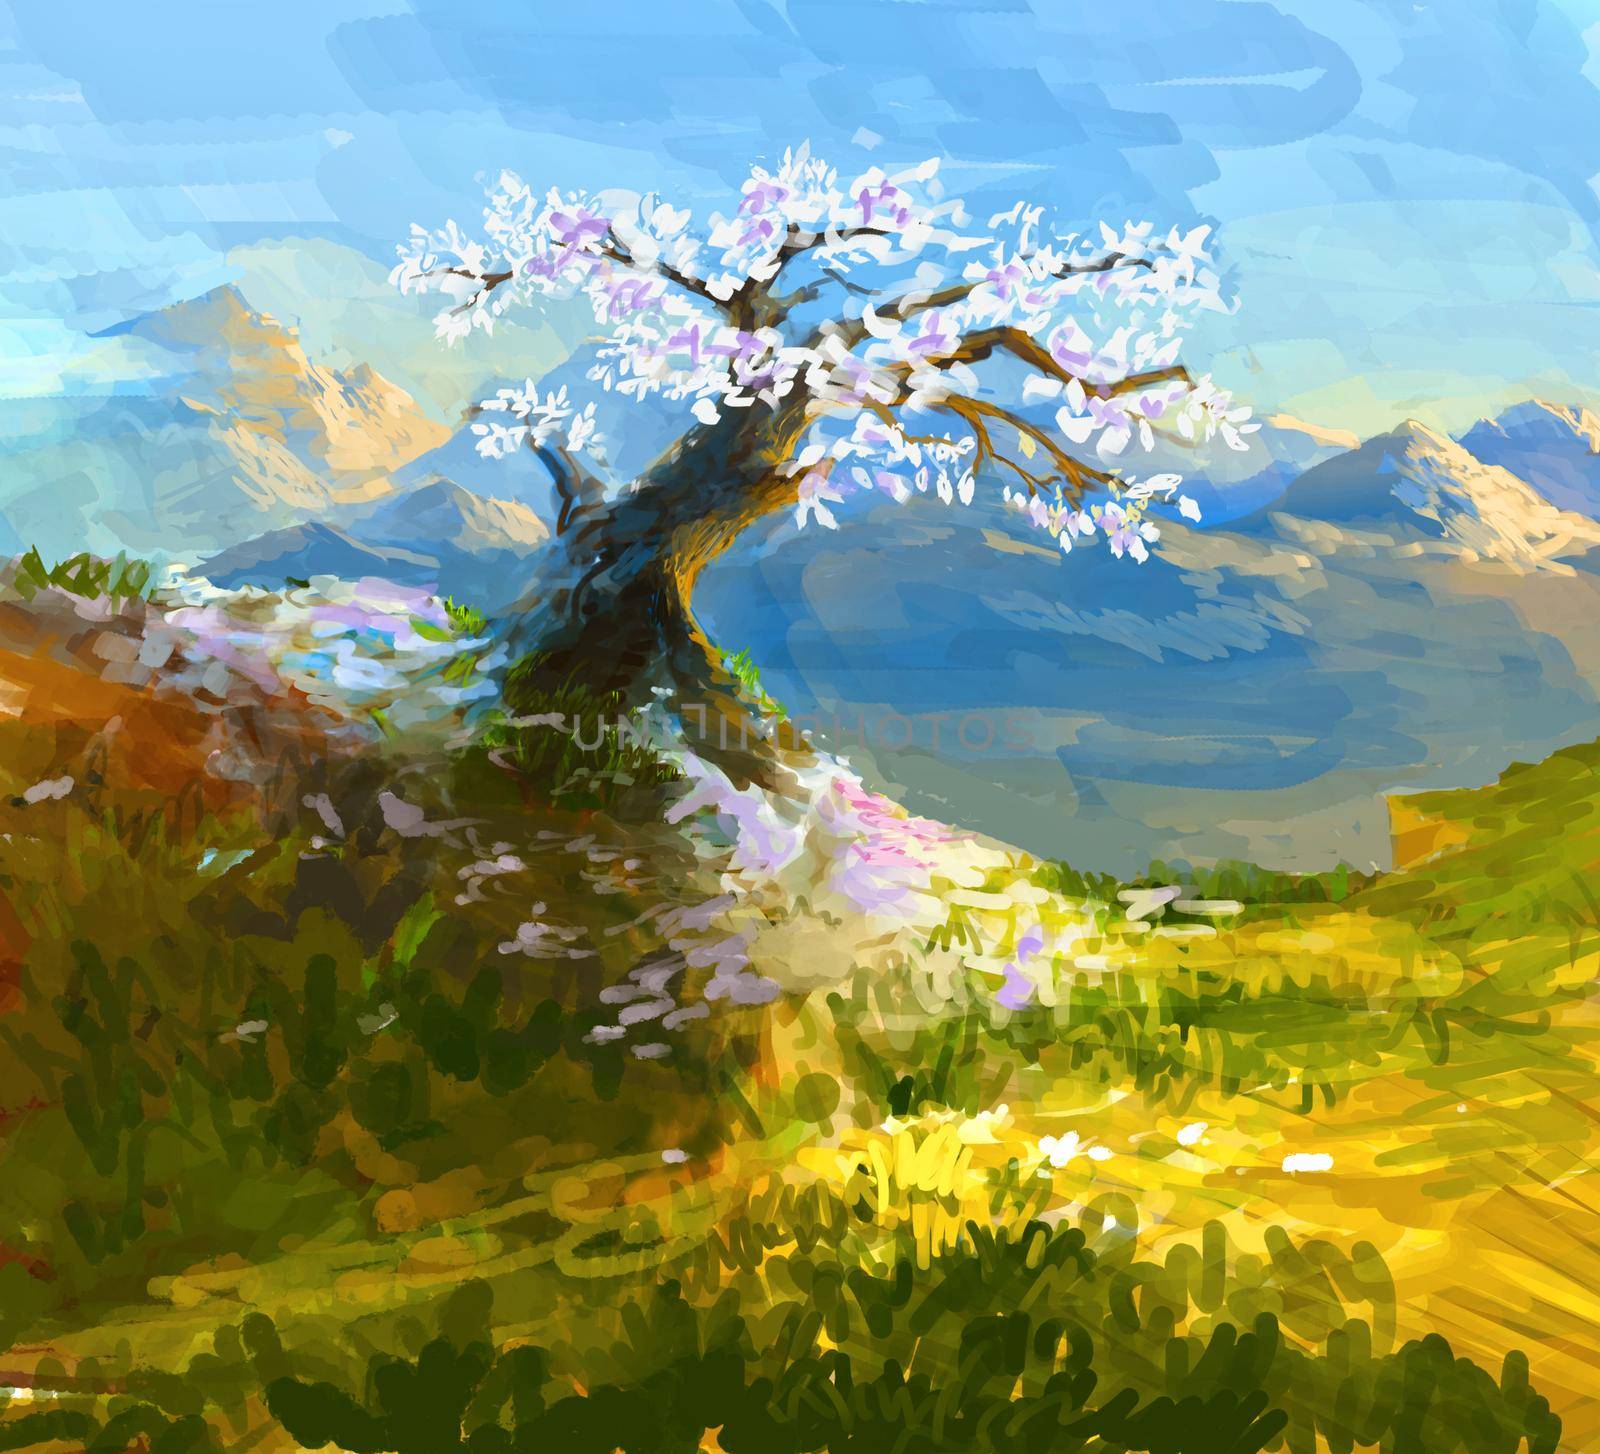 Japanese Chery Sakura fall off in Autumn Scenic Landscape Illustration under Blue sky at the Day.